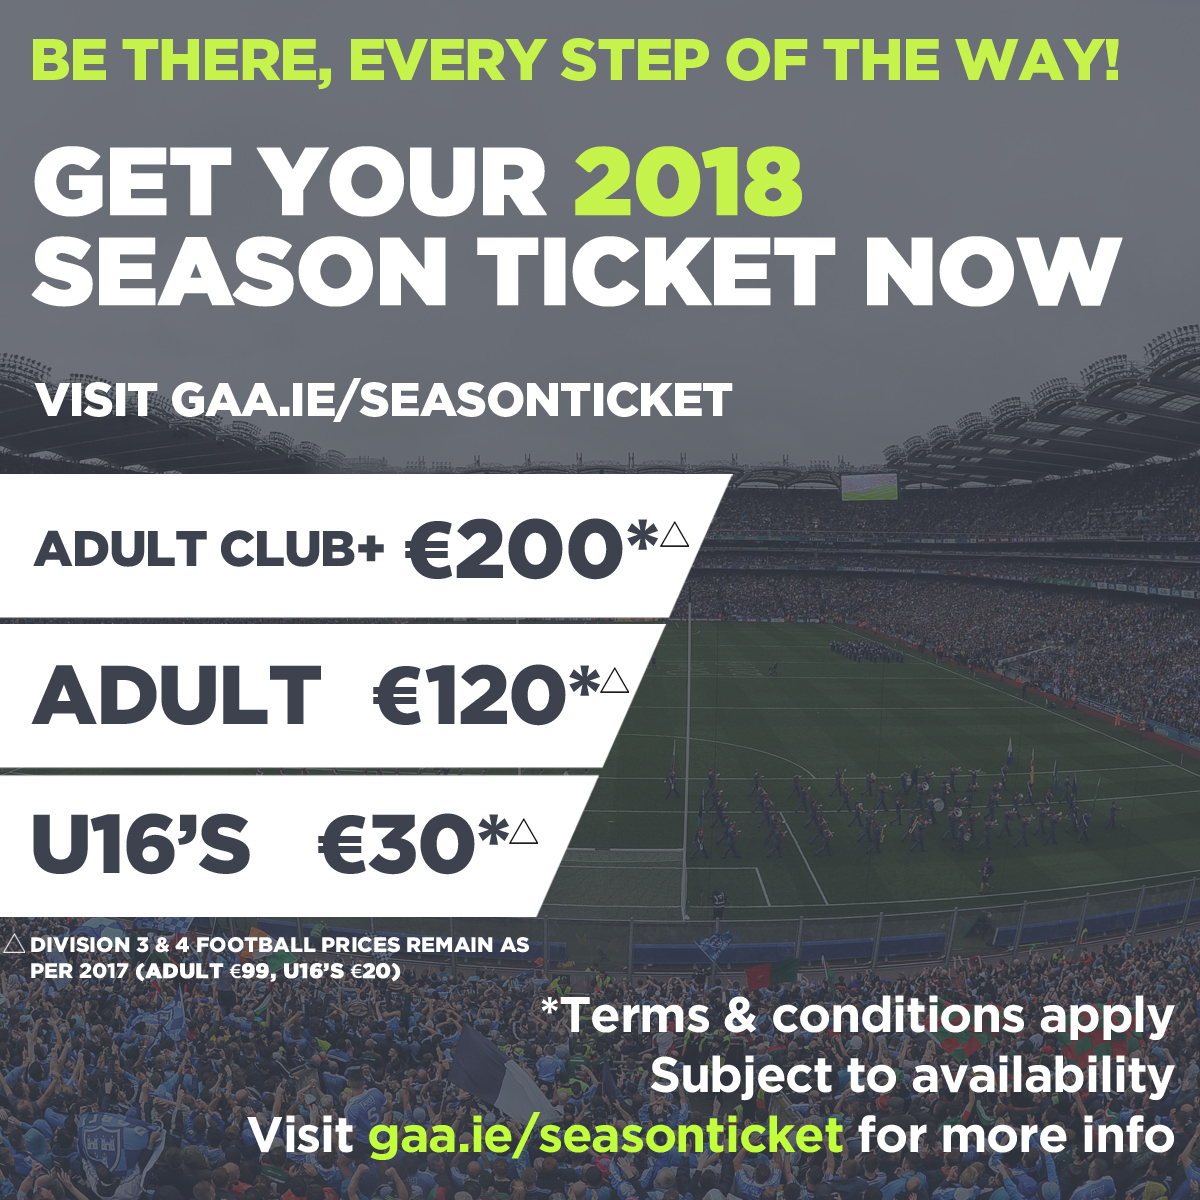 Get Your Season Ticket for the Allianz Leagues – Fixtures Included